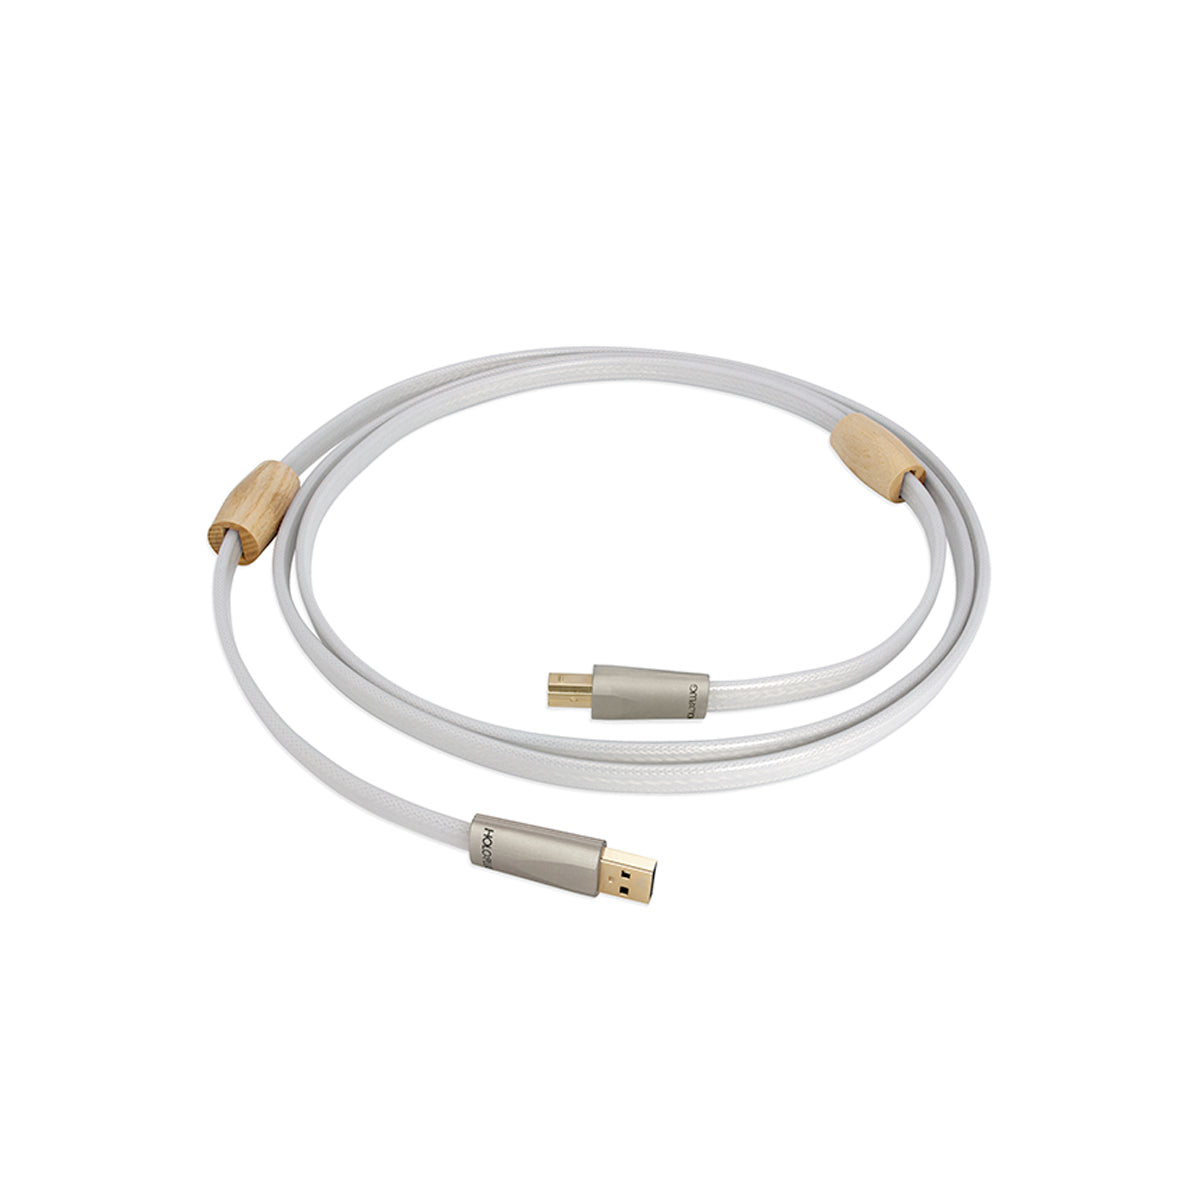 Nordost Valhalla 2 USB Cable - The Audio Experts